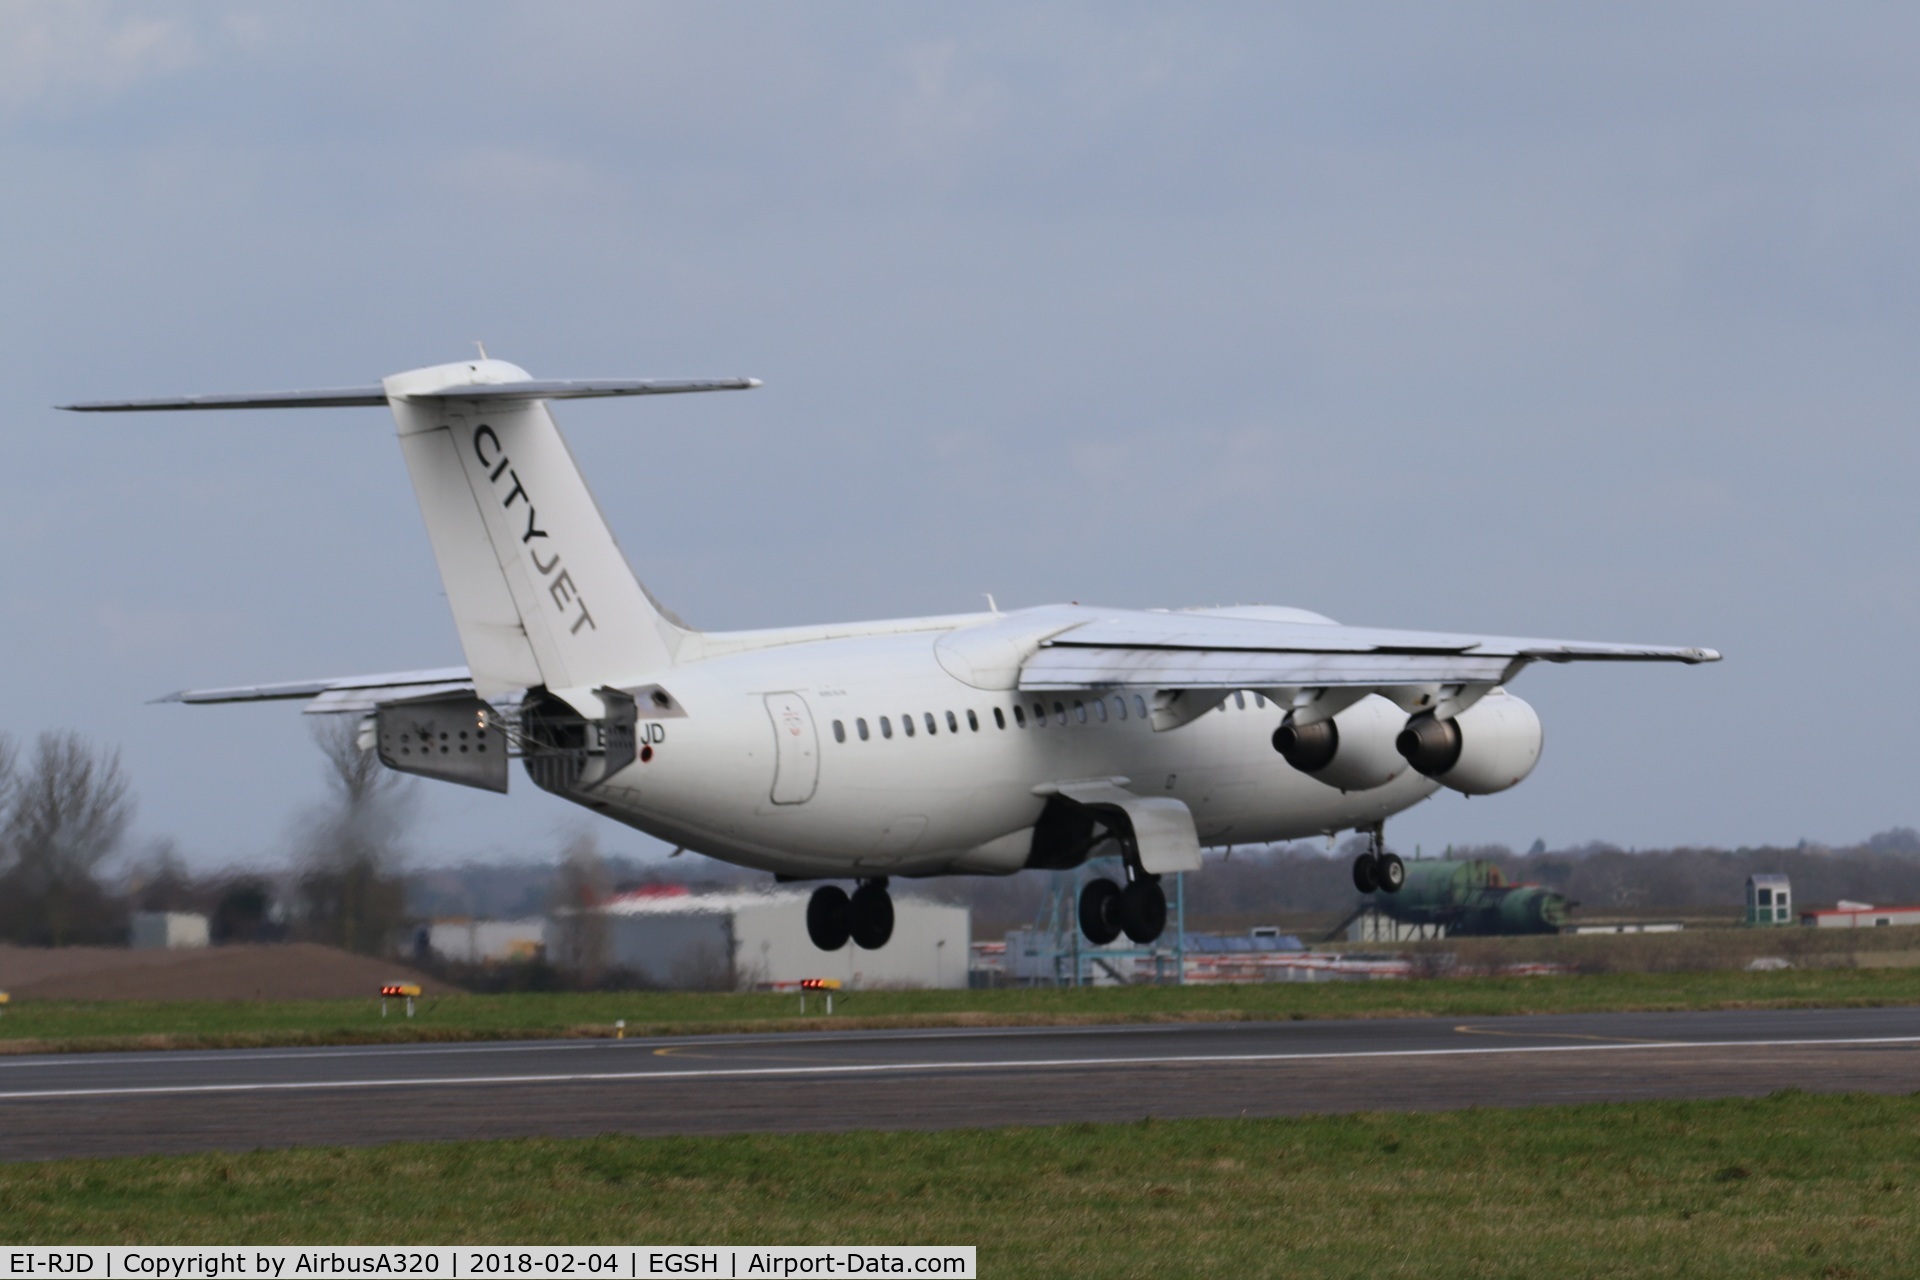 EI-RJD, 1998 BAE Systems Avro 146-RJ85 C/N E.2334, Arriving at Norwich for work with KLM